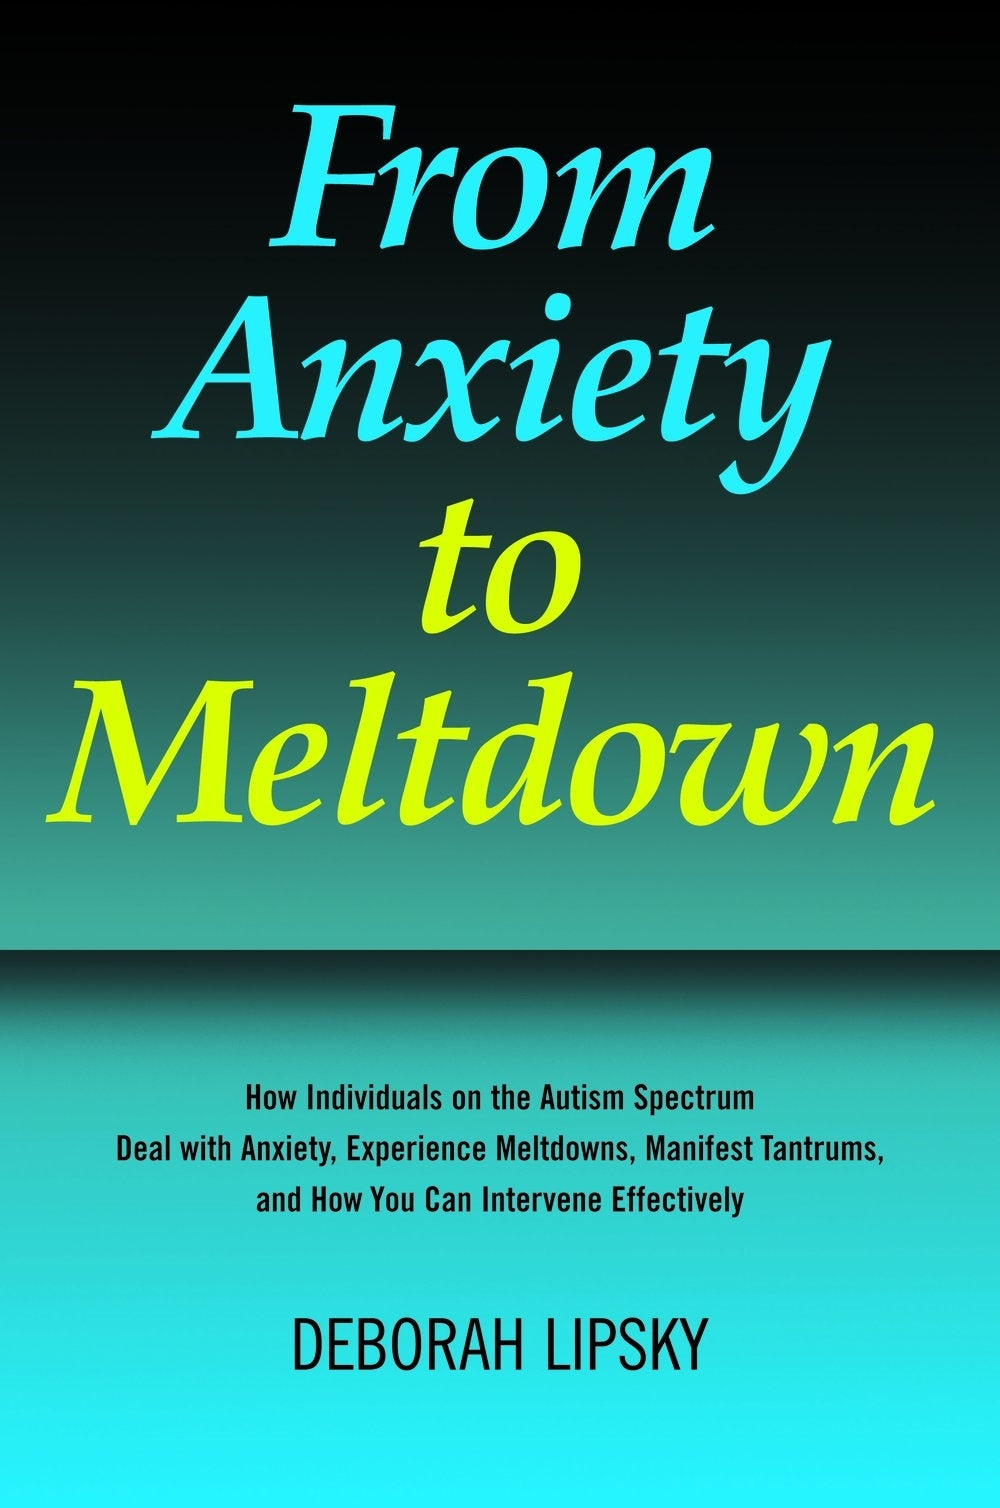 From Anxiety to Meltdown by Deborah Lipsky